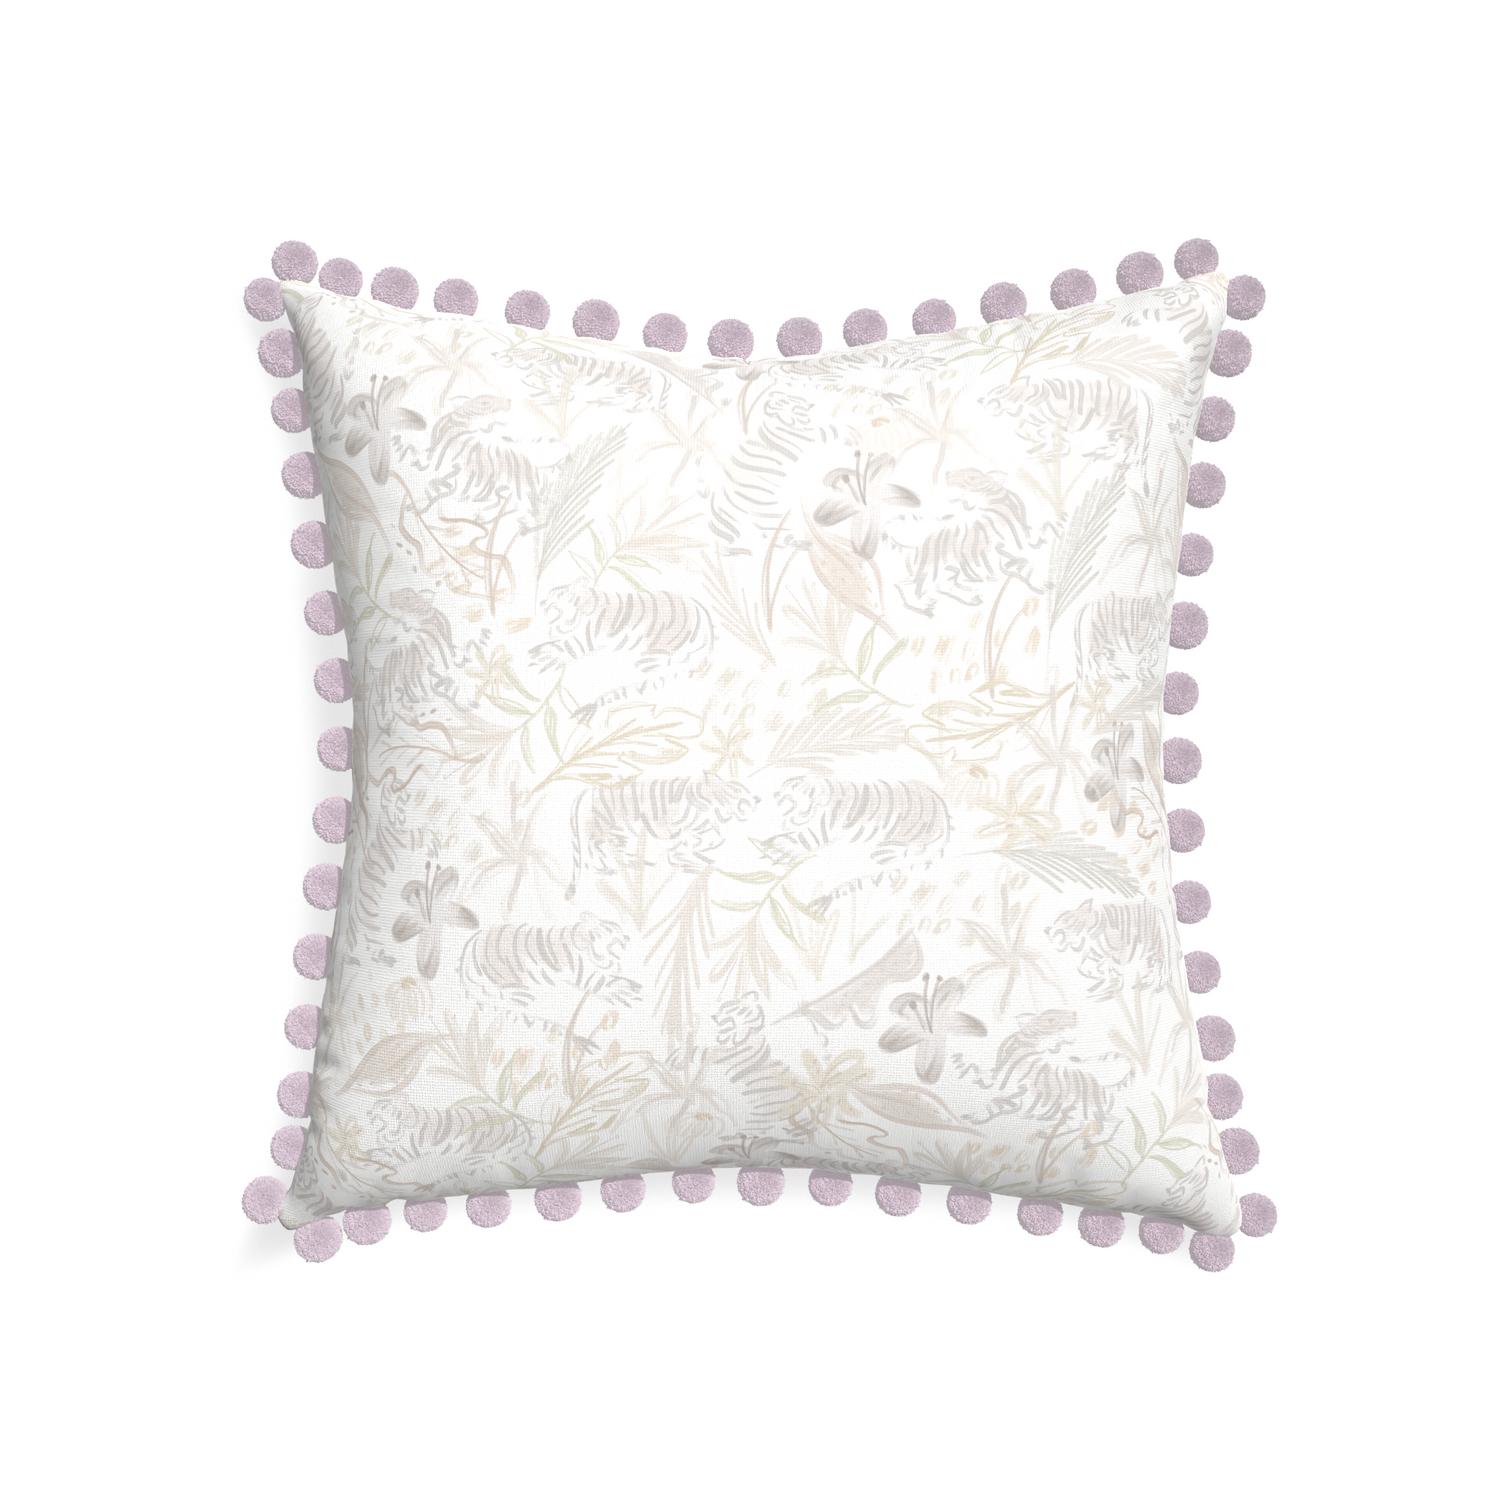 22-square frida sand custom beige chinoiserie tigerpillow with l on white background